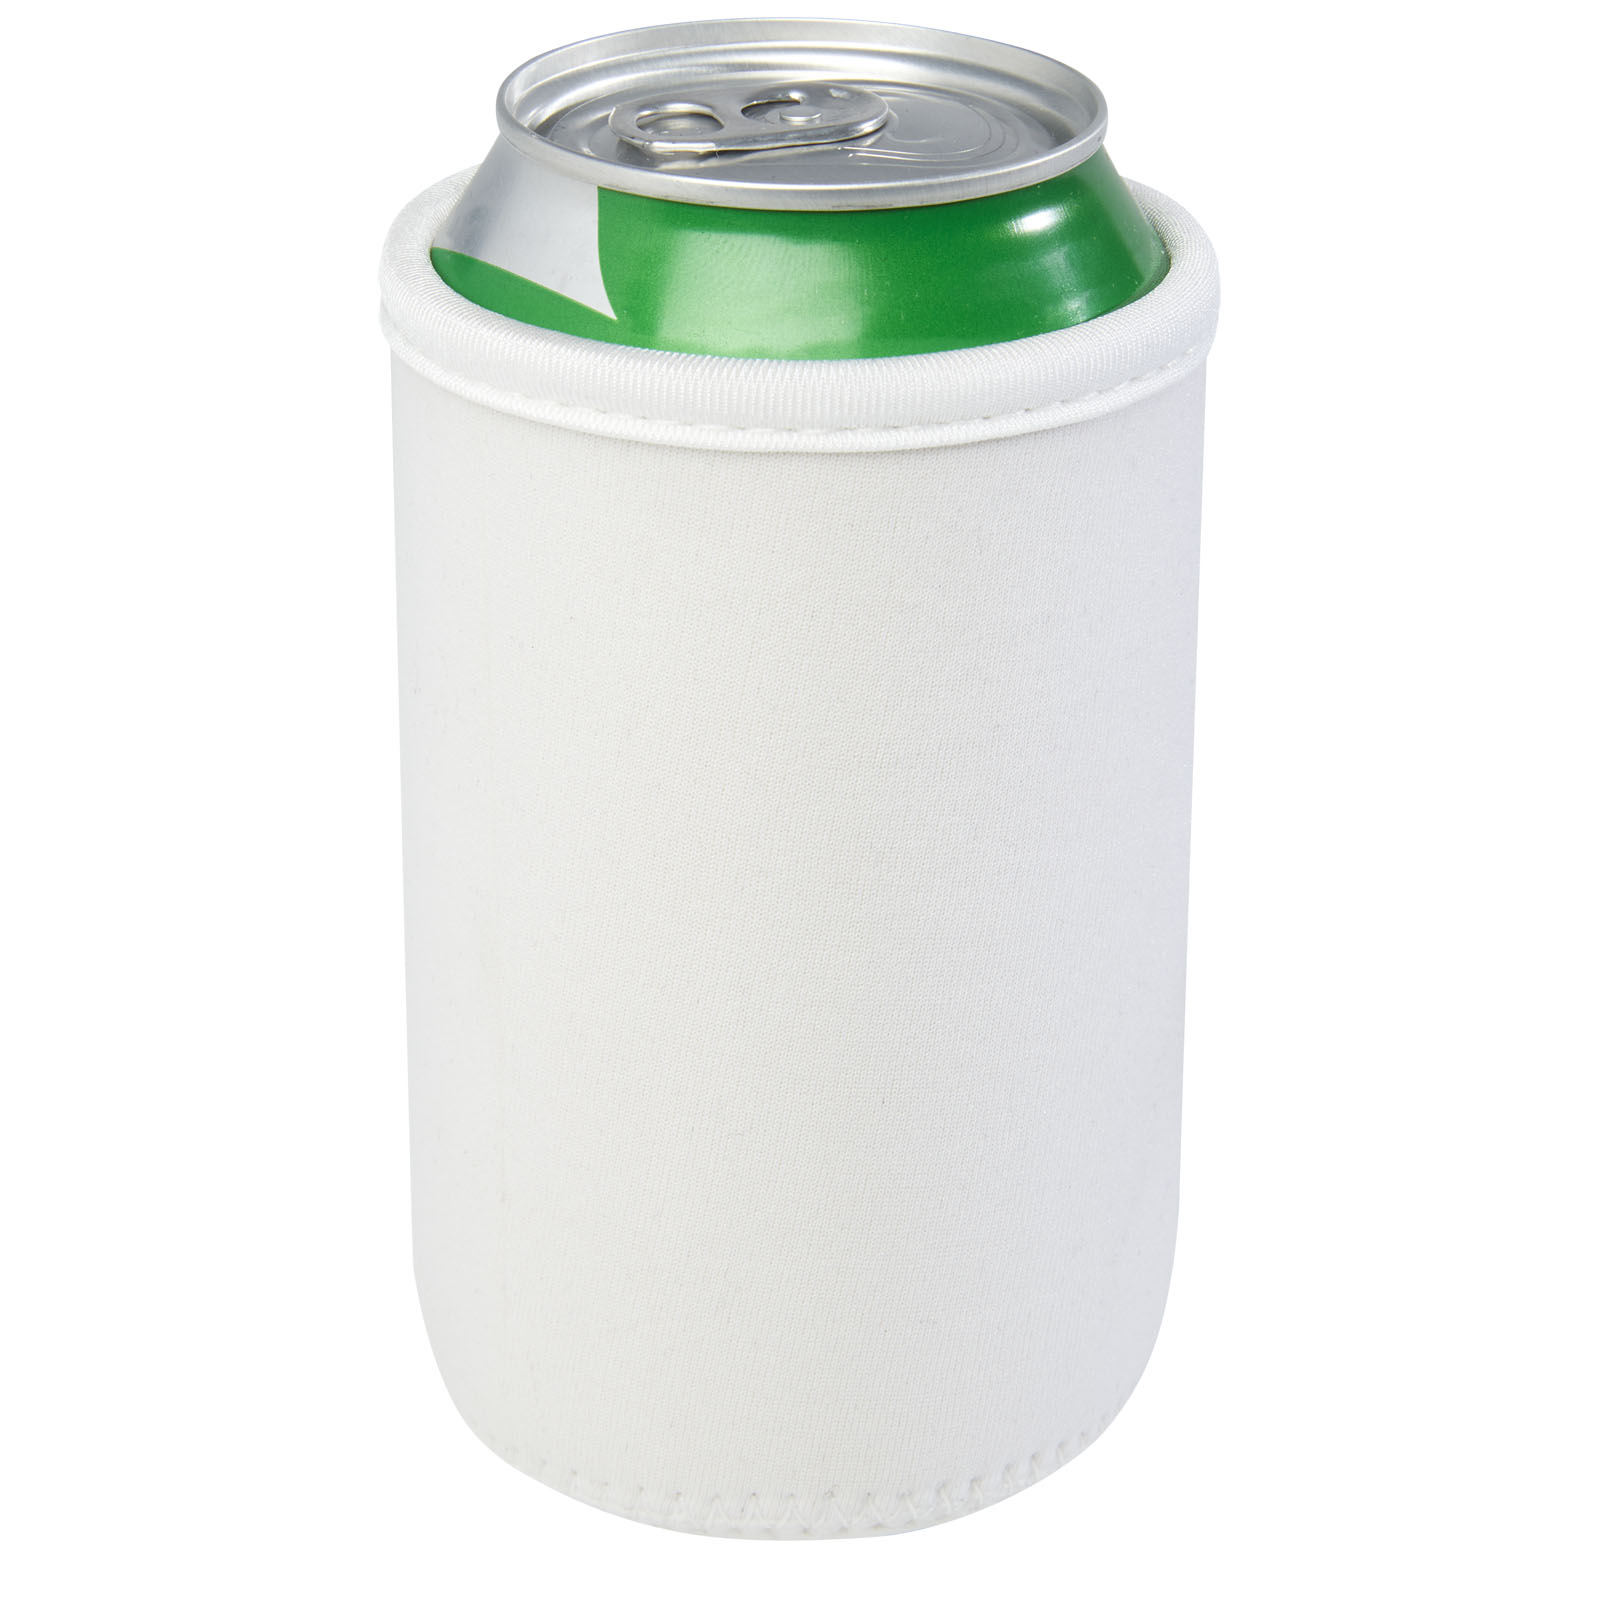 Advertising Cooler bags - Vrie recycled neoprene can sleeve holder - 3